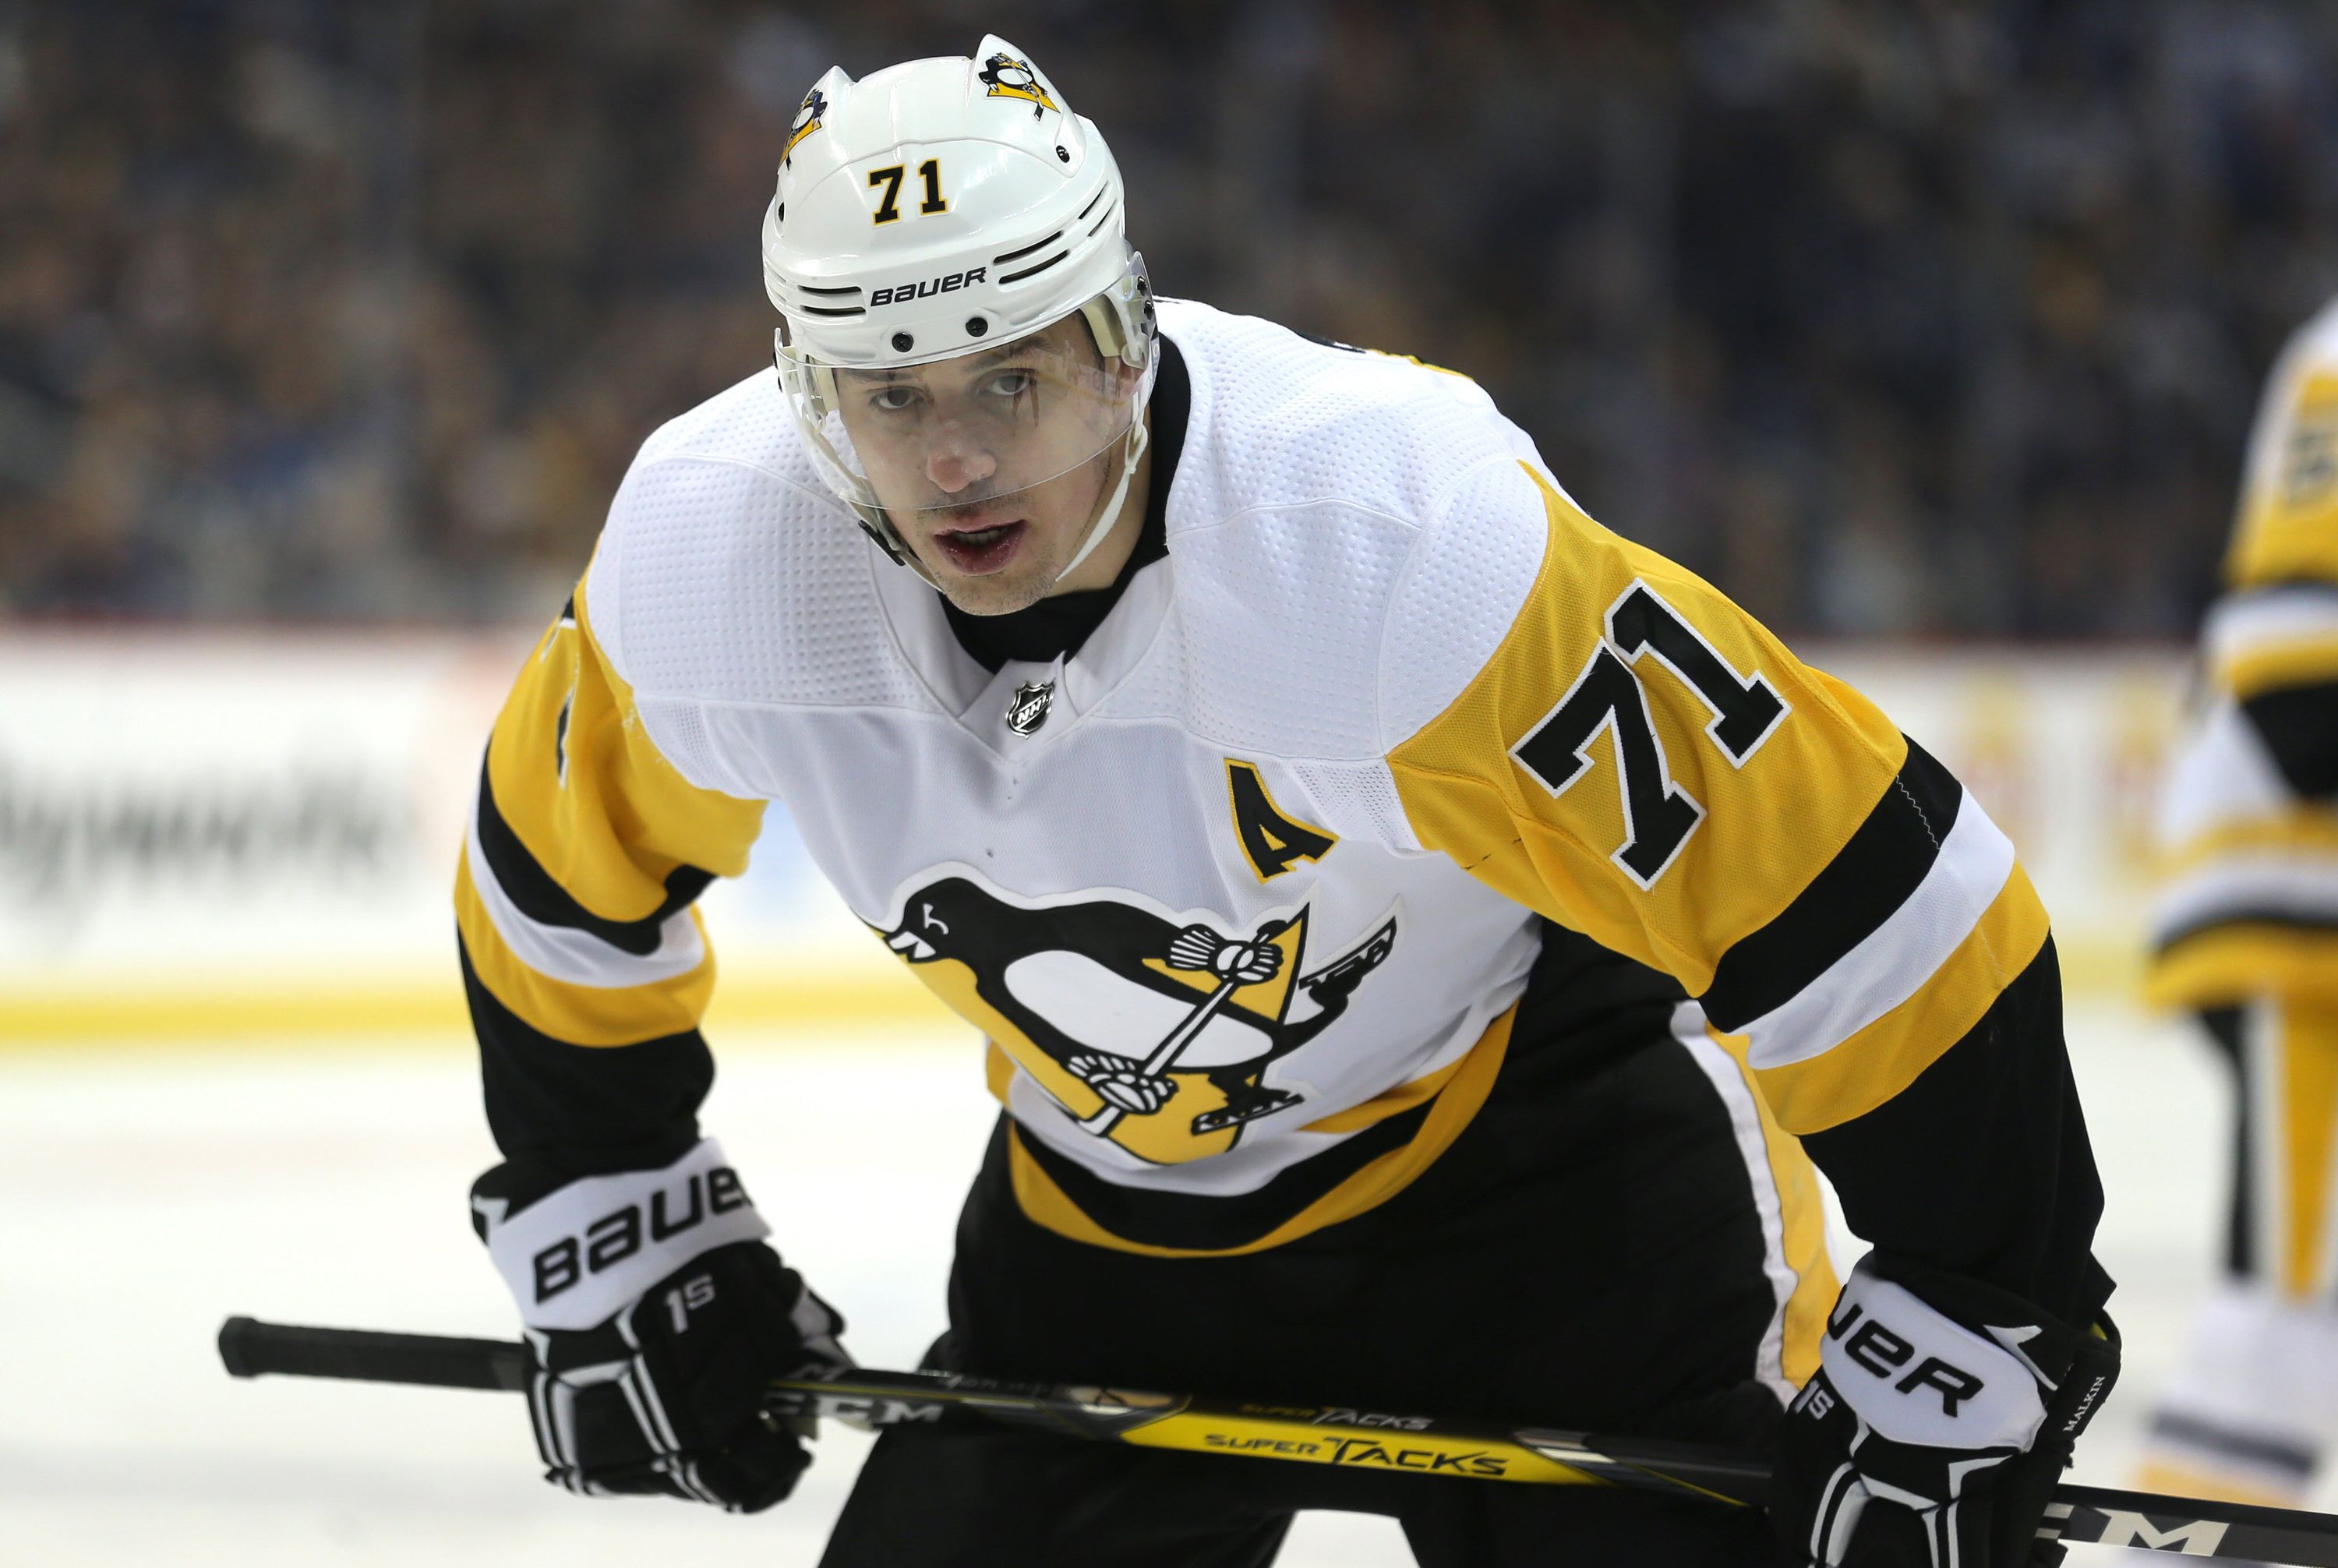 Sidney Crosby has goal, 3 assists as Penguins beat Maple Leafs